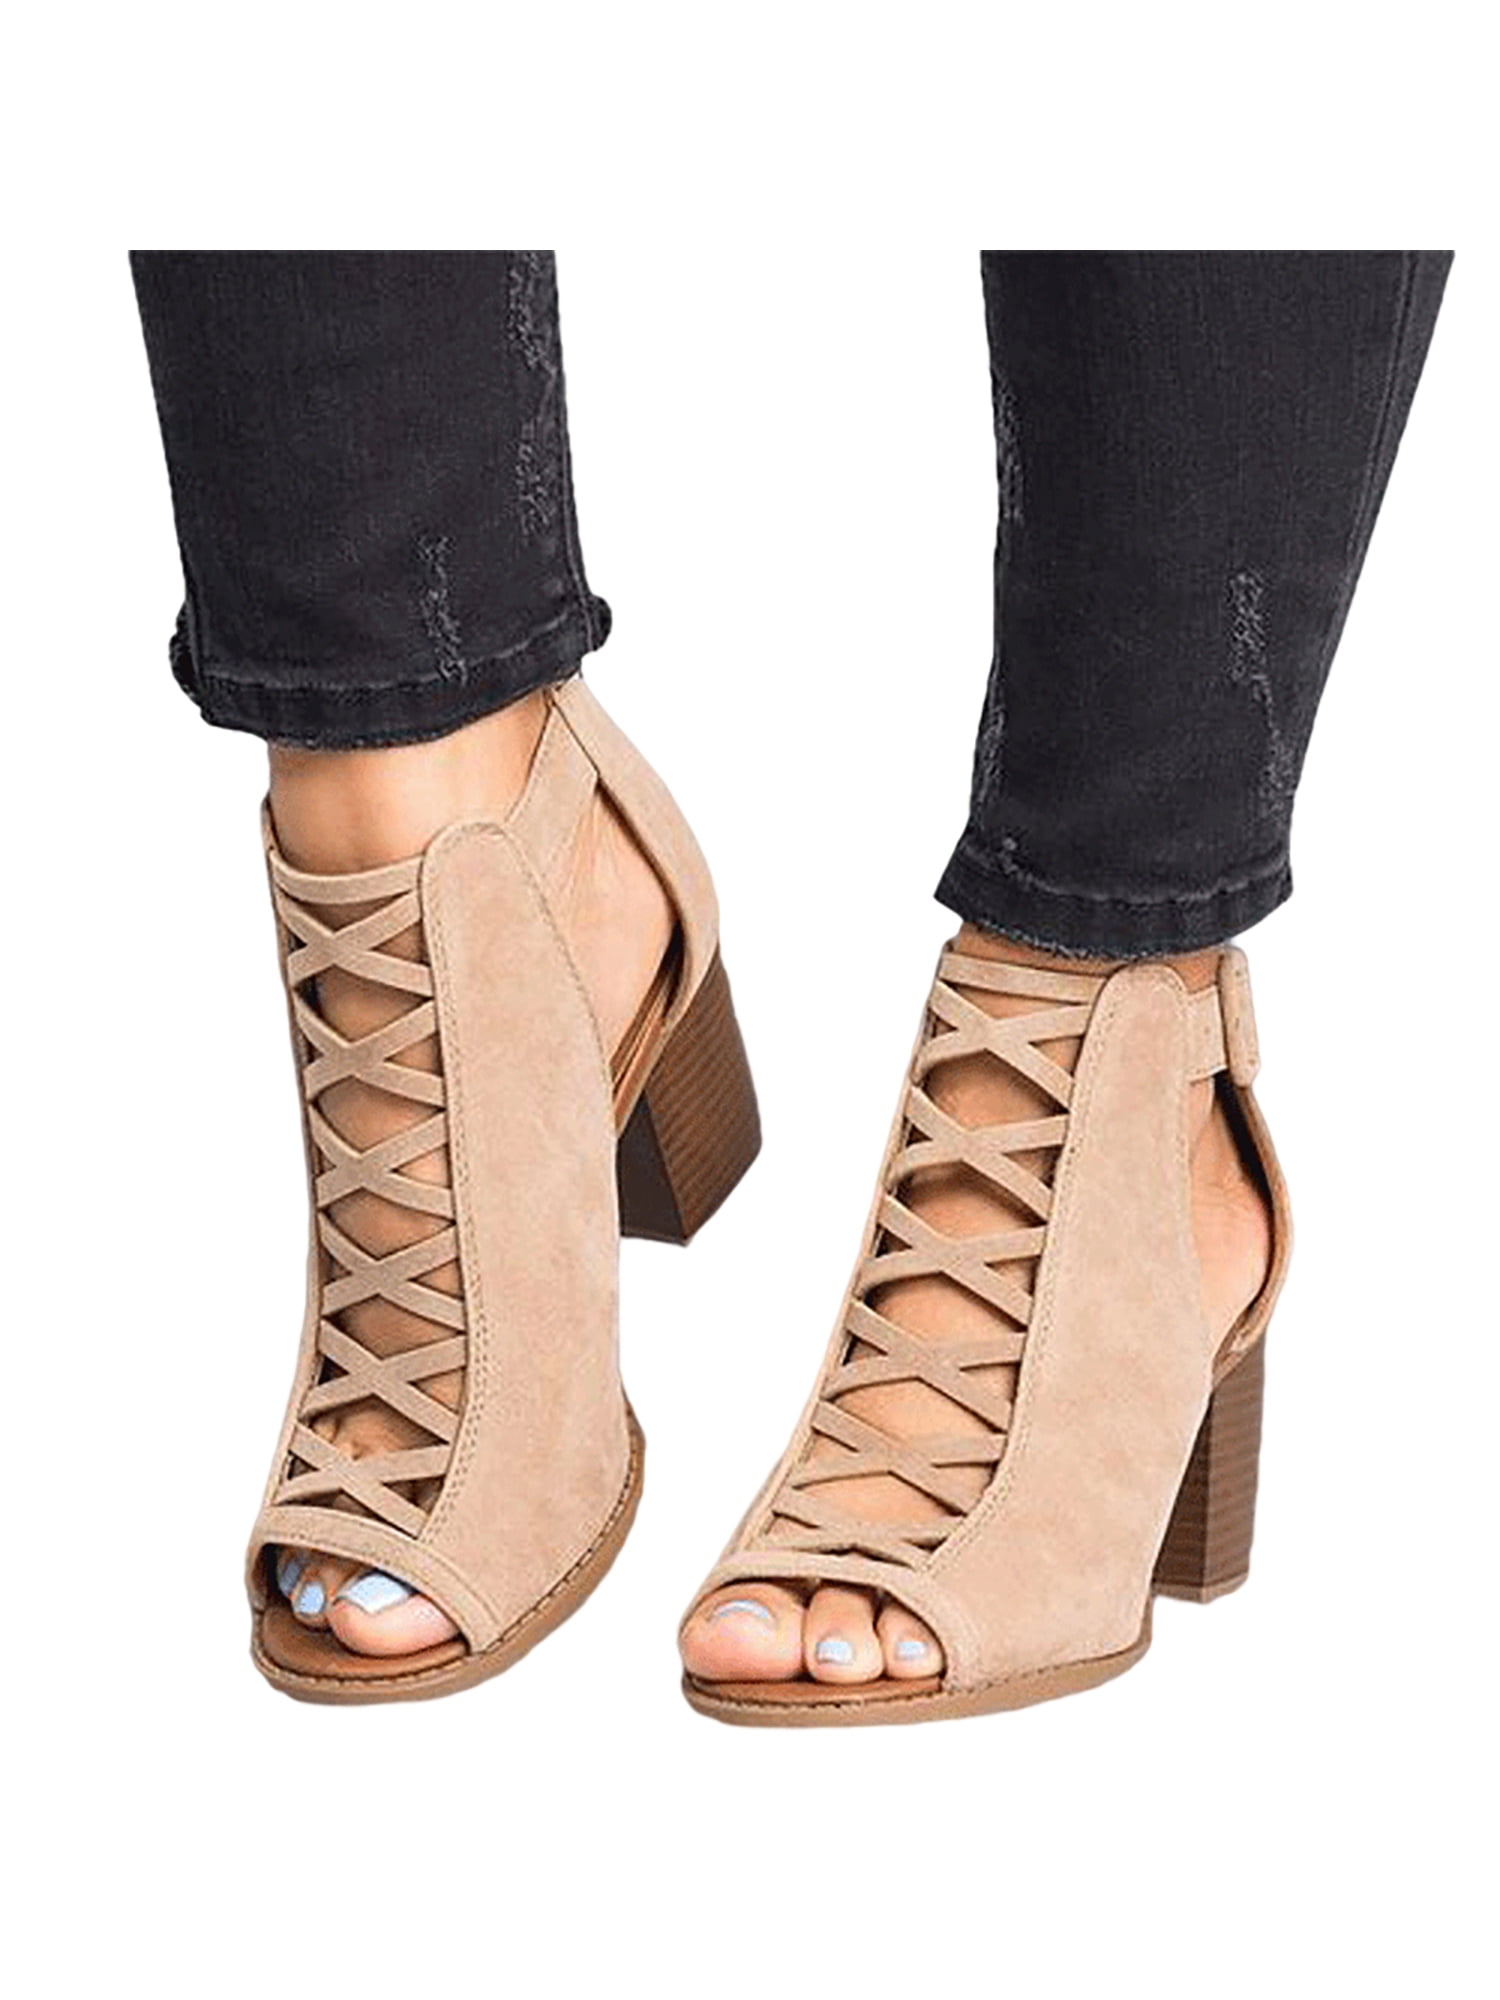 Details about   Pretty Womens Faux Suede Chunky Heels Pointed Toe Cross Strap Breathable Shoes 